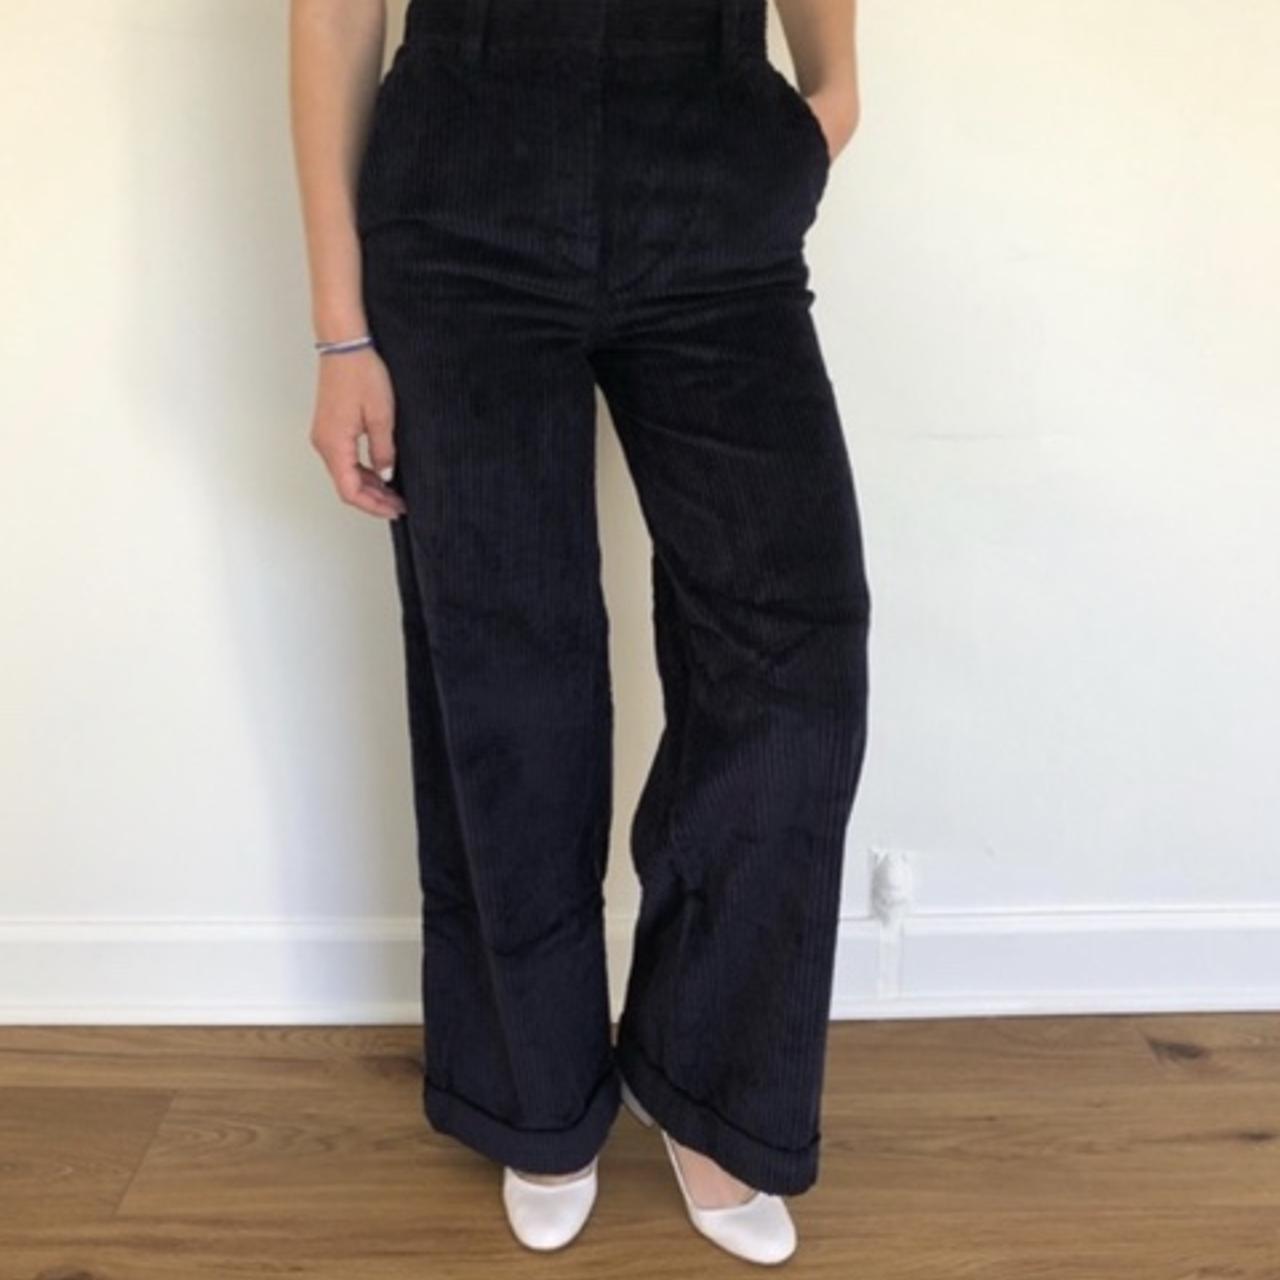 COS Navy Corduroy Wide Leg trousers size 42 which... - Depop